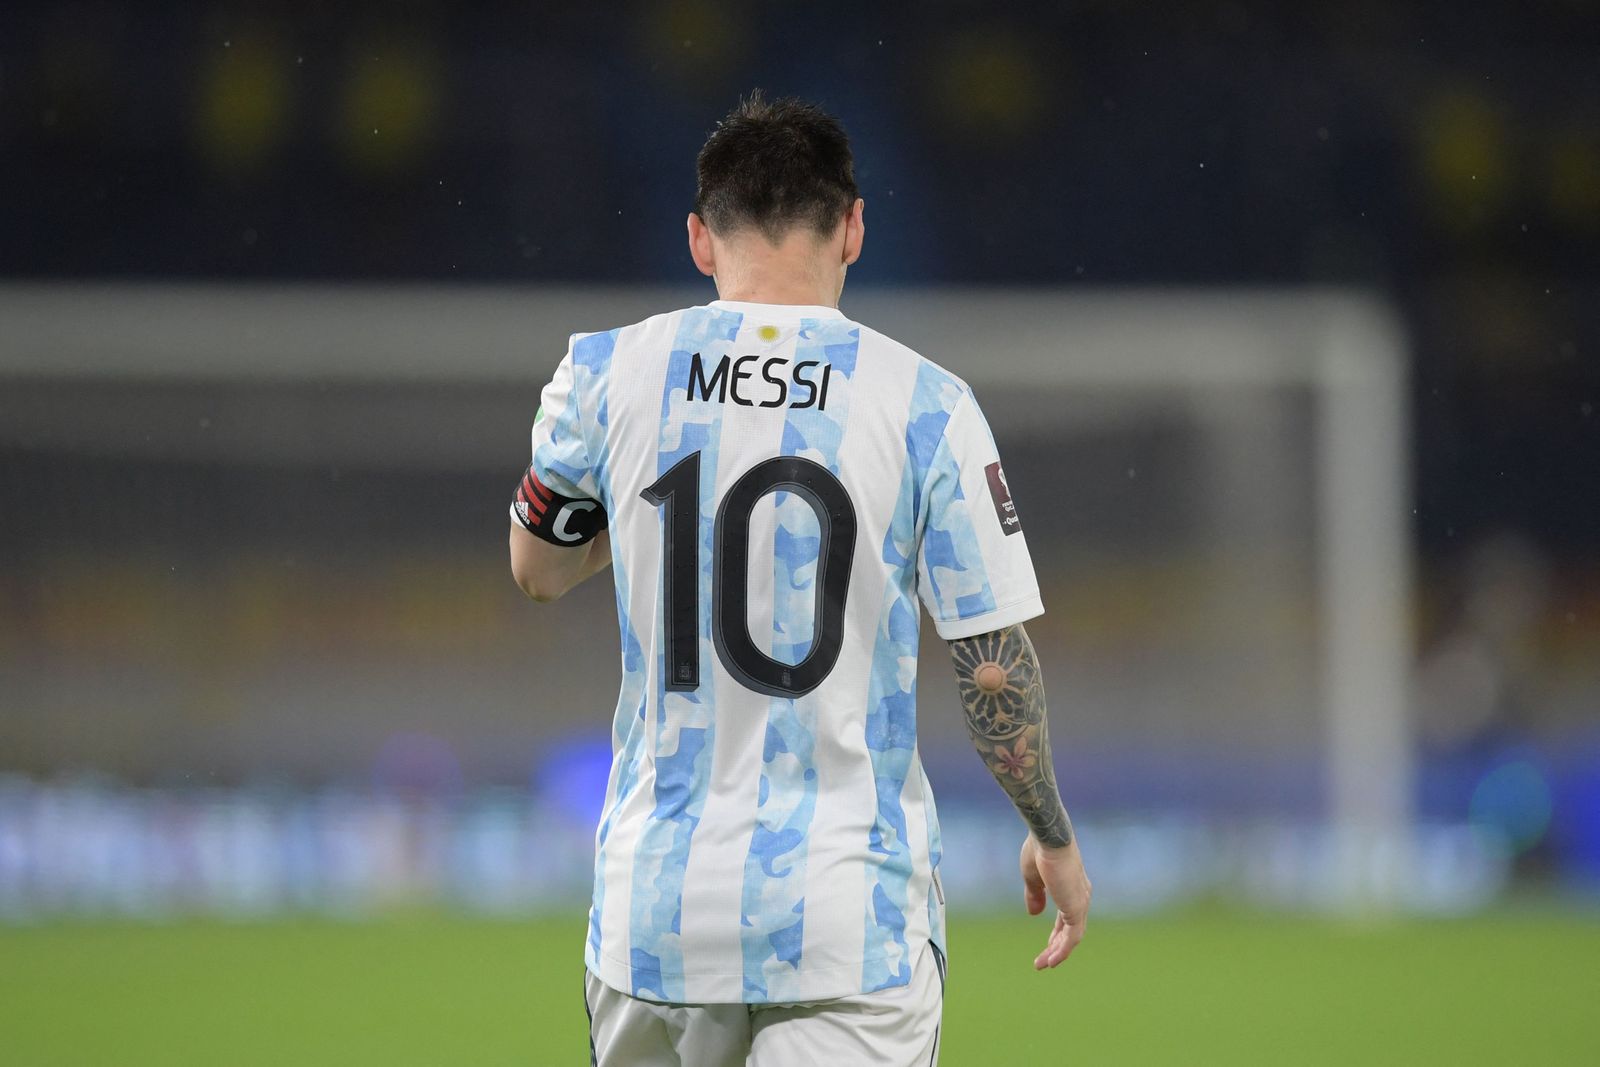 Argentina's Lionel Messi is seen during the South American qualification football match for the FIFA World Cup Qatar 2022 between Colombia and Argentina at the Roberto Melendez Metropolitan Stadium in Barranquilla, Colombia, on June 8, 2021. (Photo by Raul ARBOLEDA / AFP) - AFP